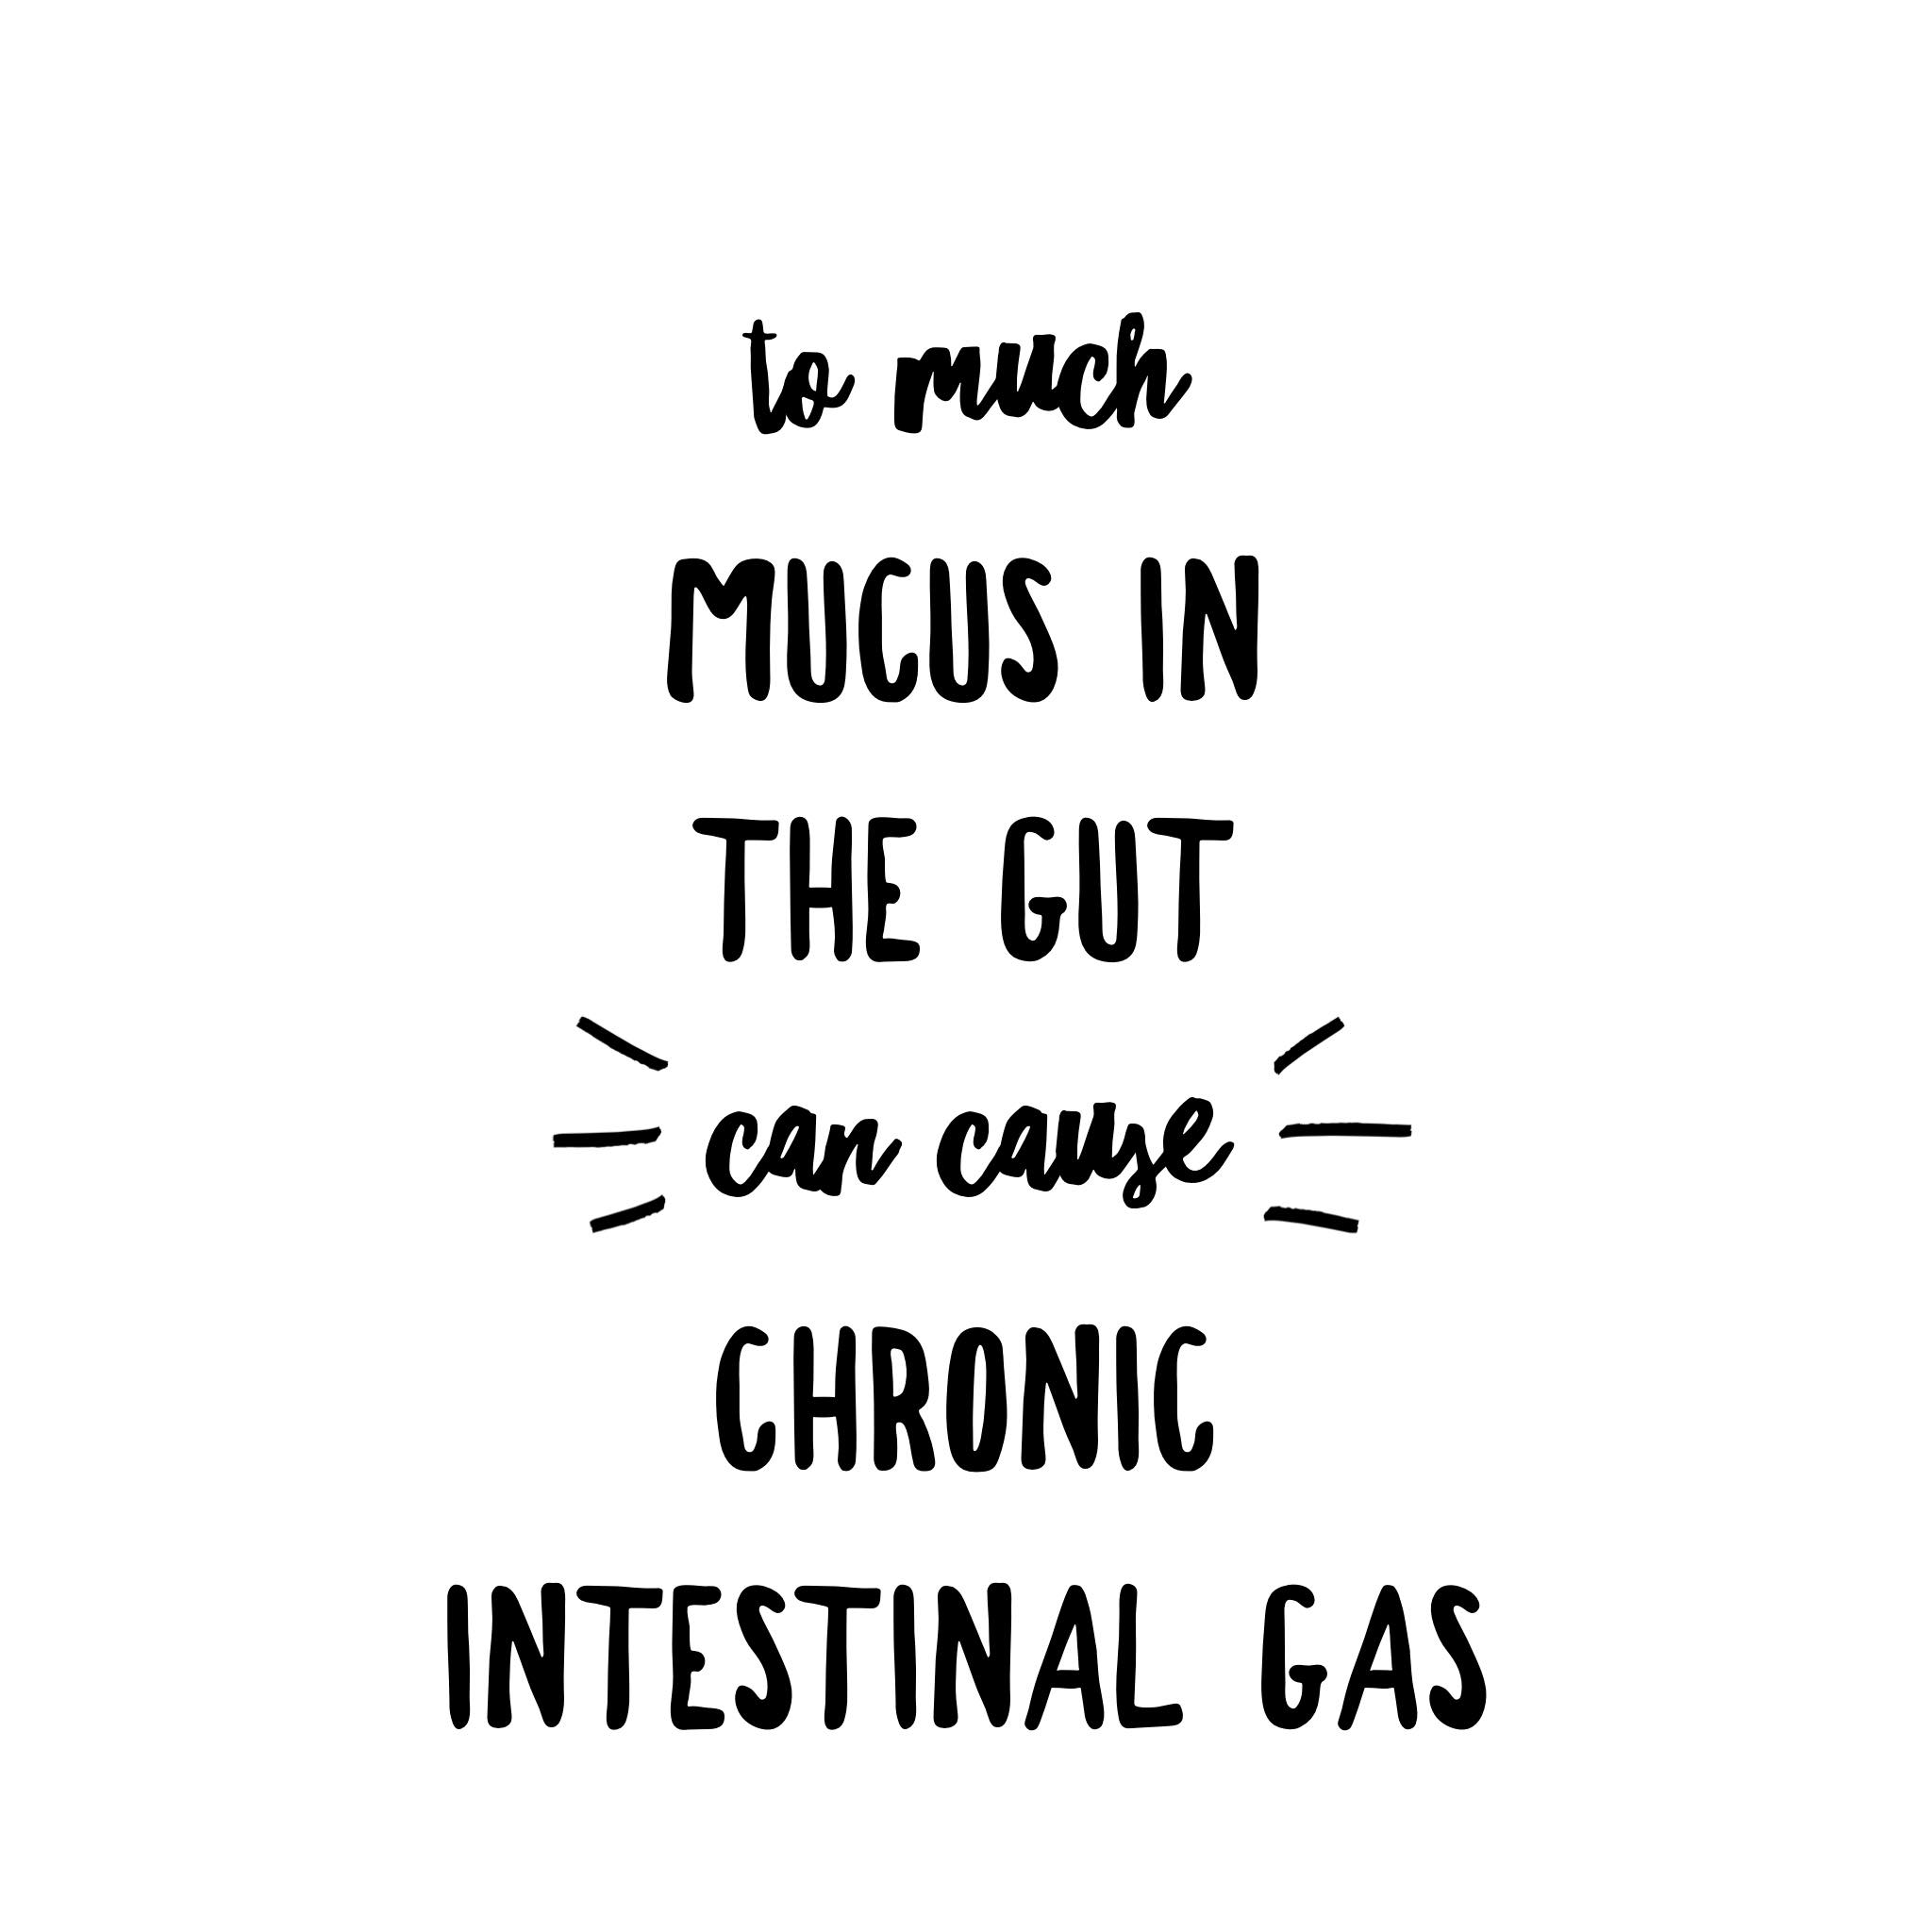 Gas and intestinal discomfort could be a result of excessive mucus in the bowls